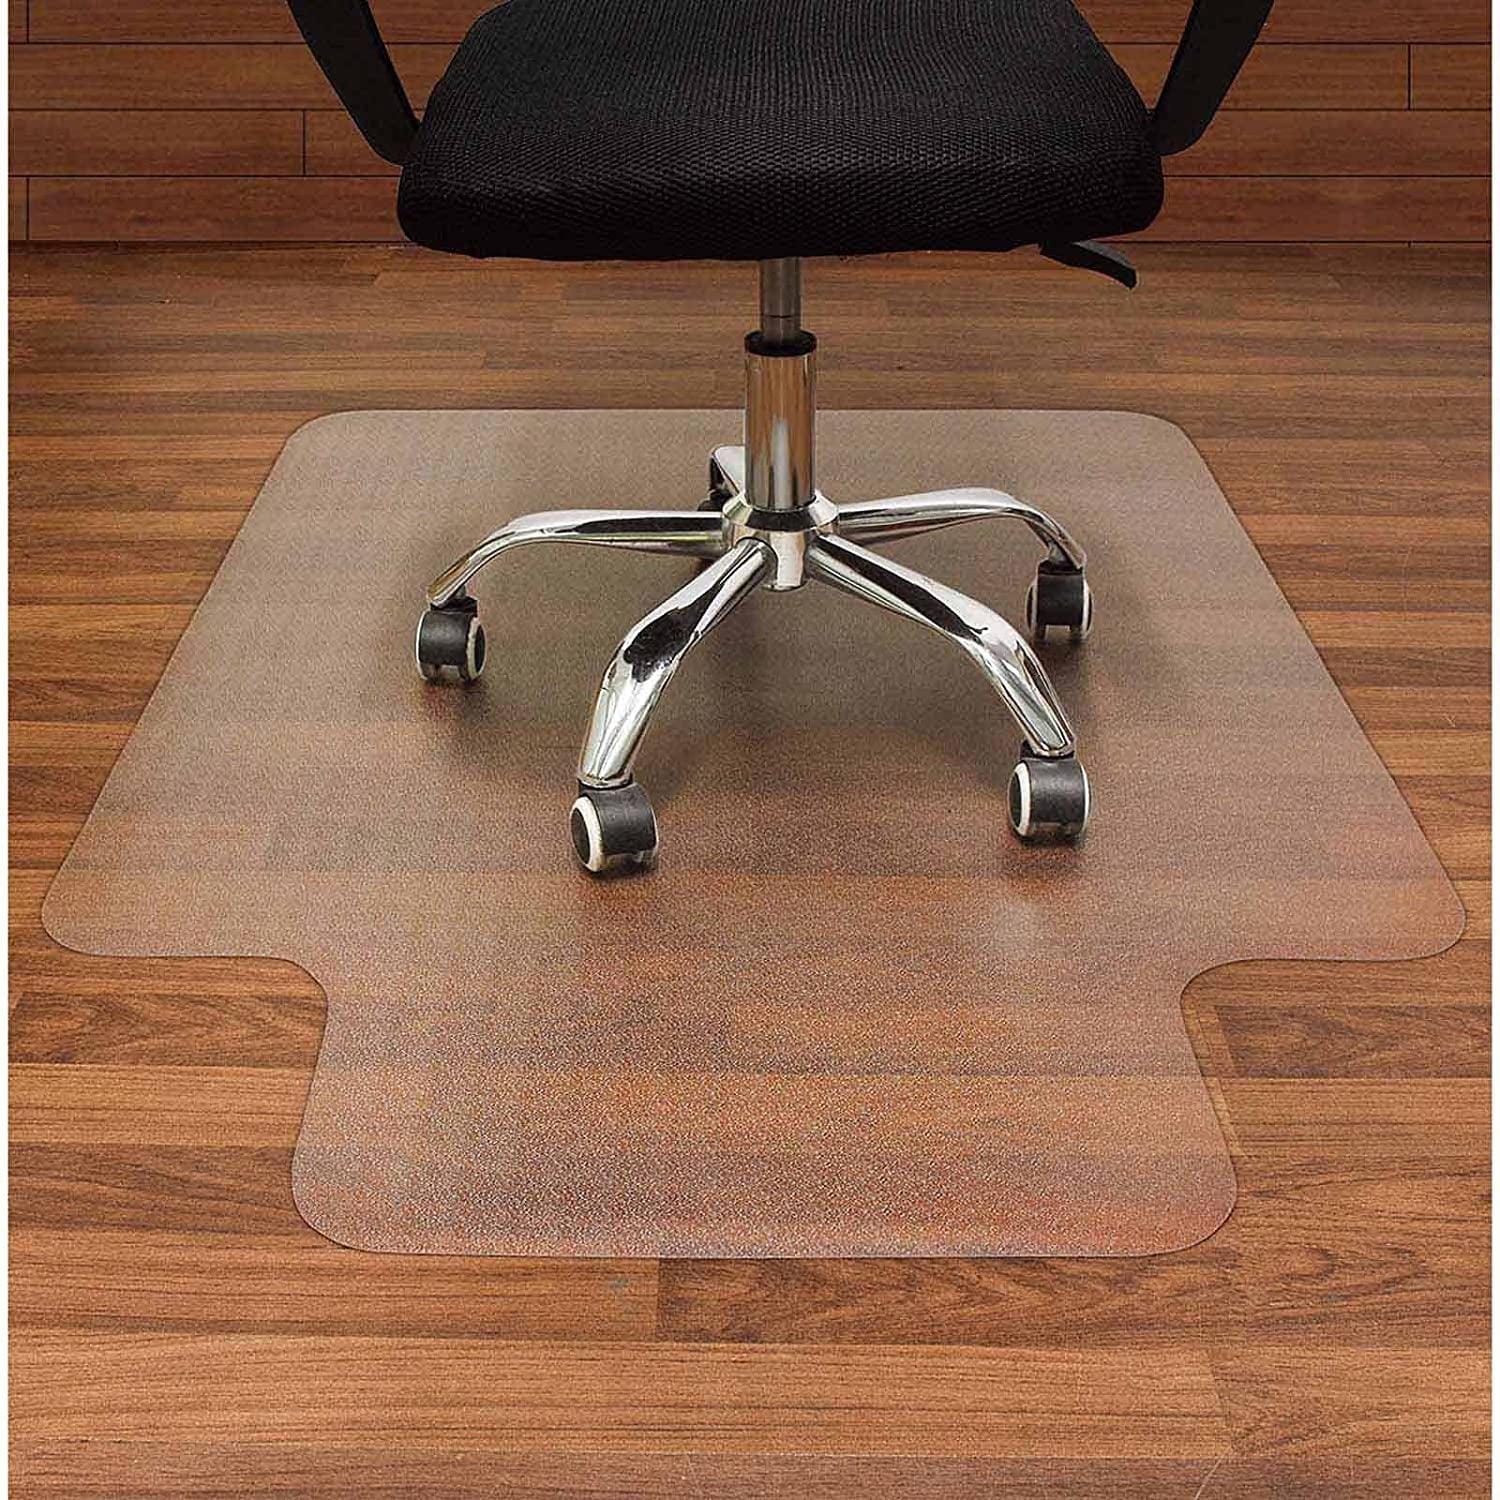 36"x48" PVC Protector Chair Mat Rolling Office For Hard Wood Floor/ Carpet Floor 